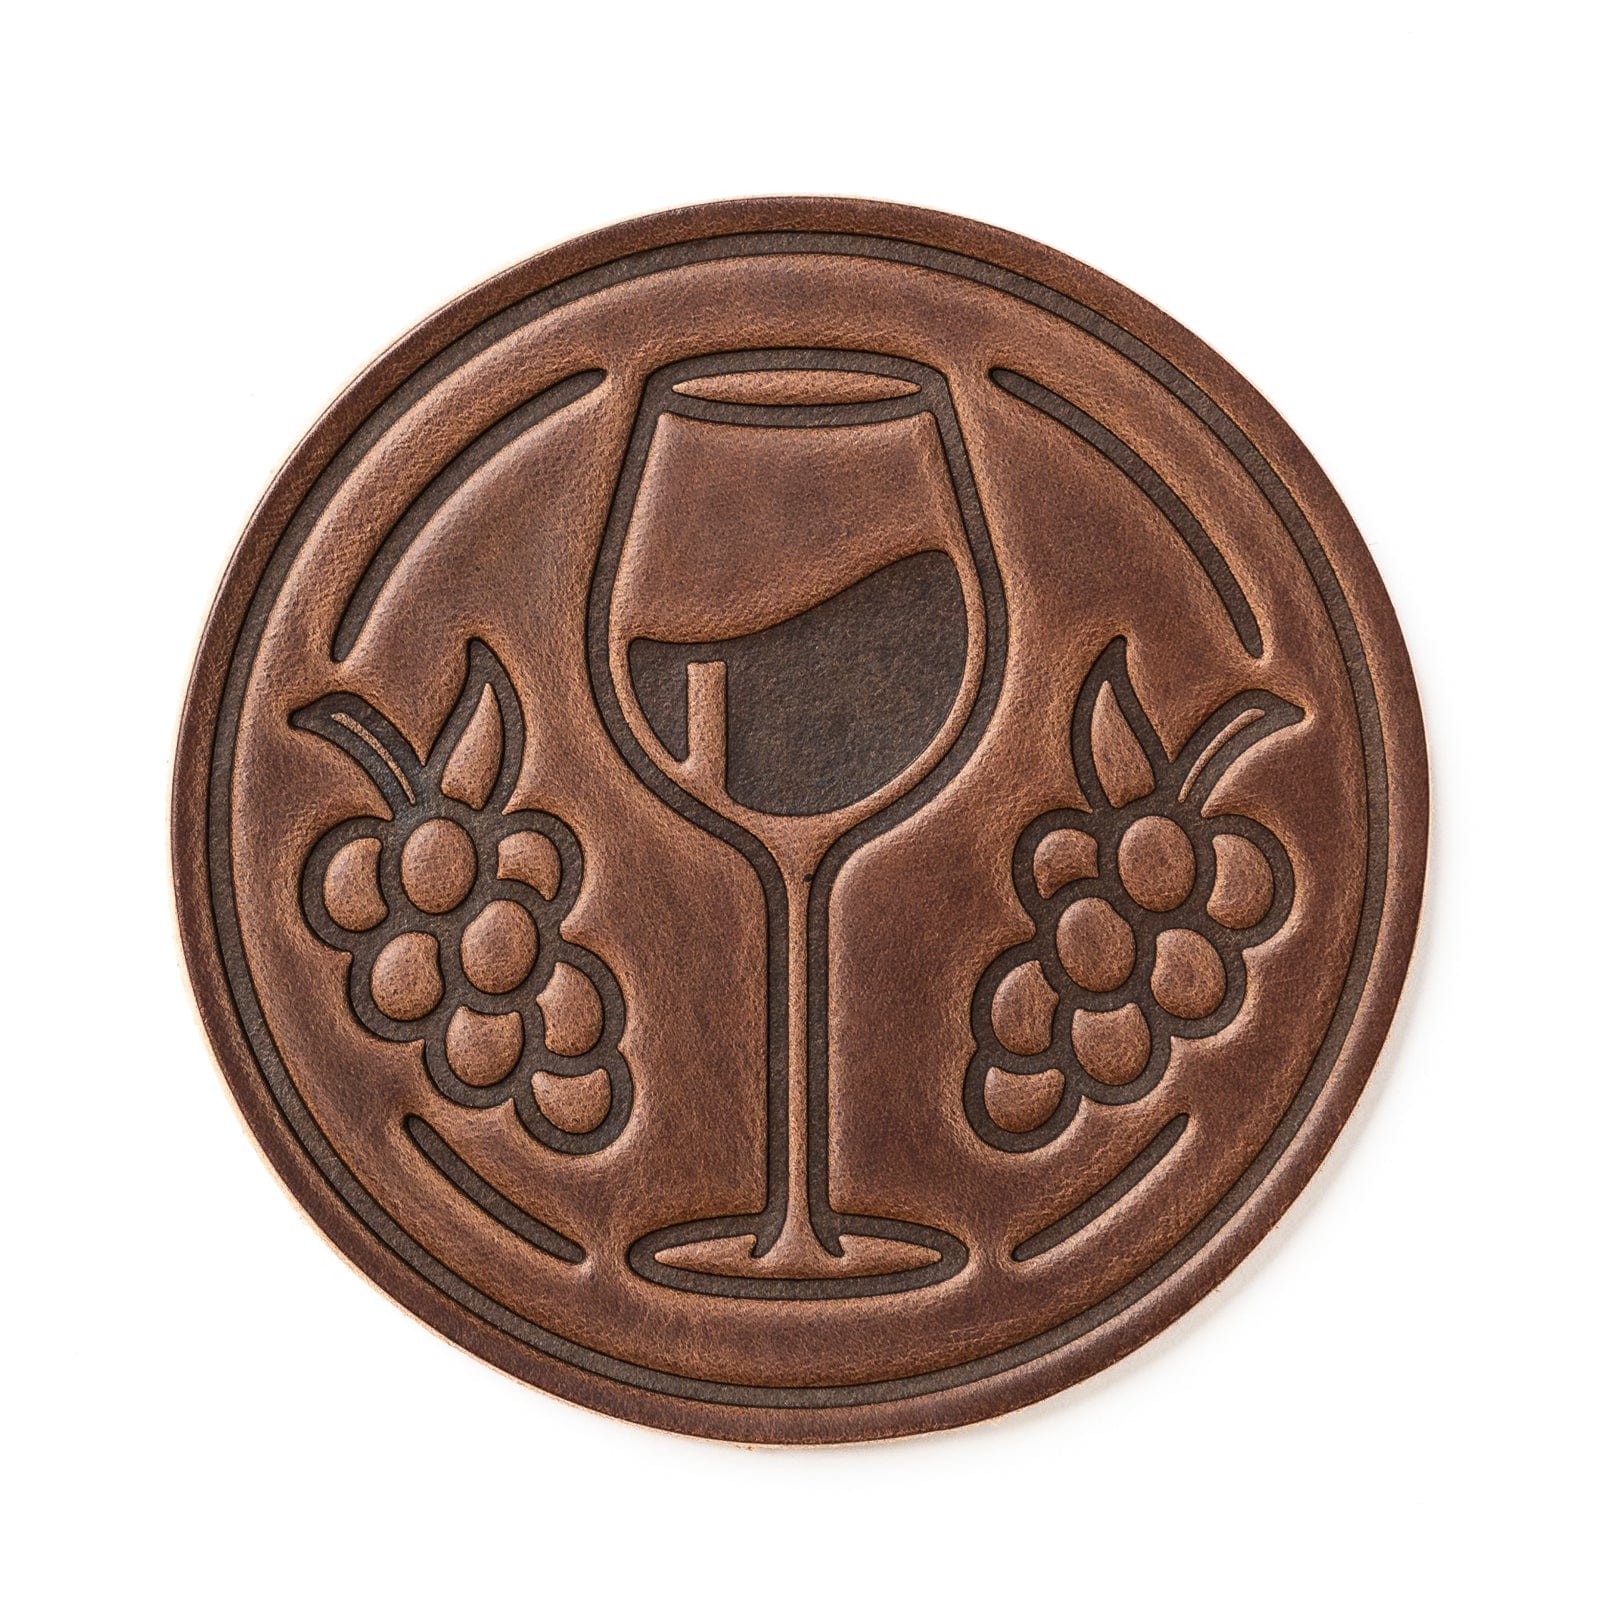 Merlot Coasters - Natural - 4 Pack Popov Leather